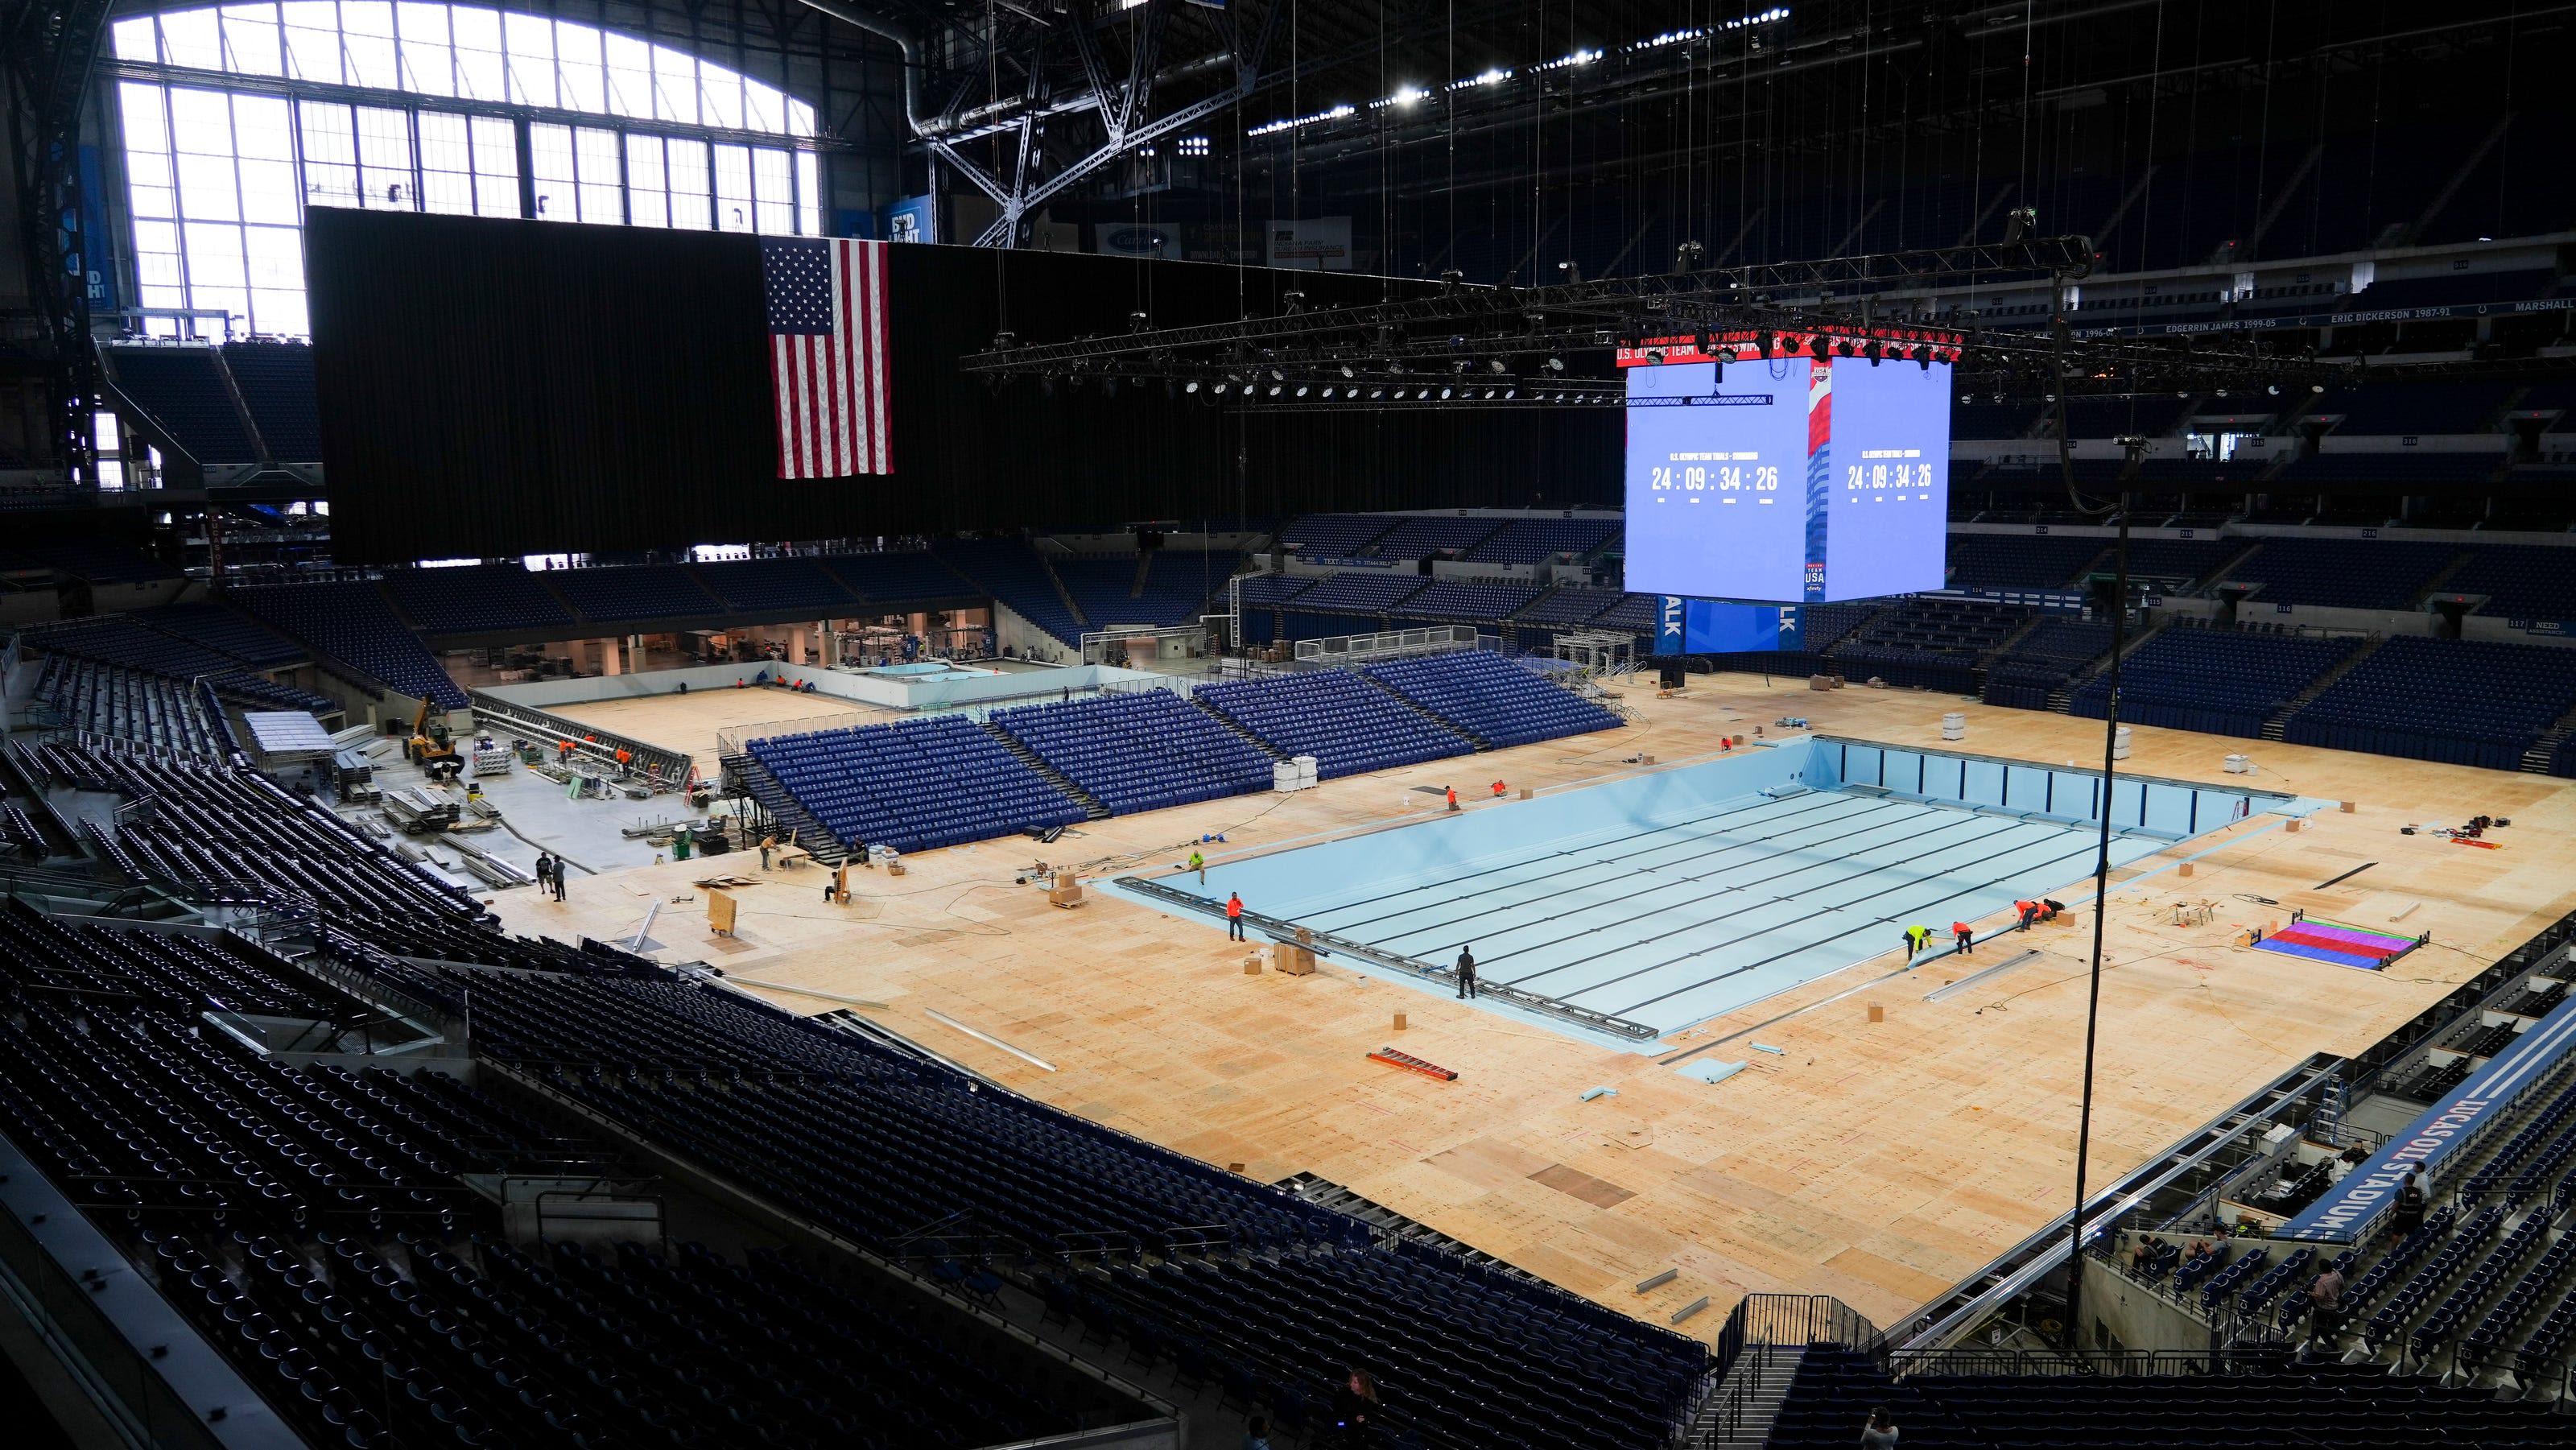 Watch as Lucas Oil Stadium builds a pool for the USA Olympic swim team trials